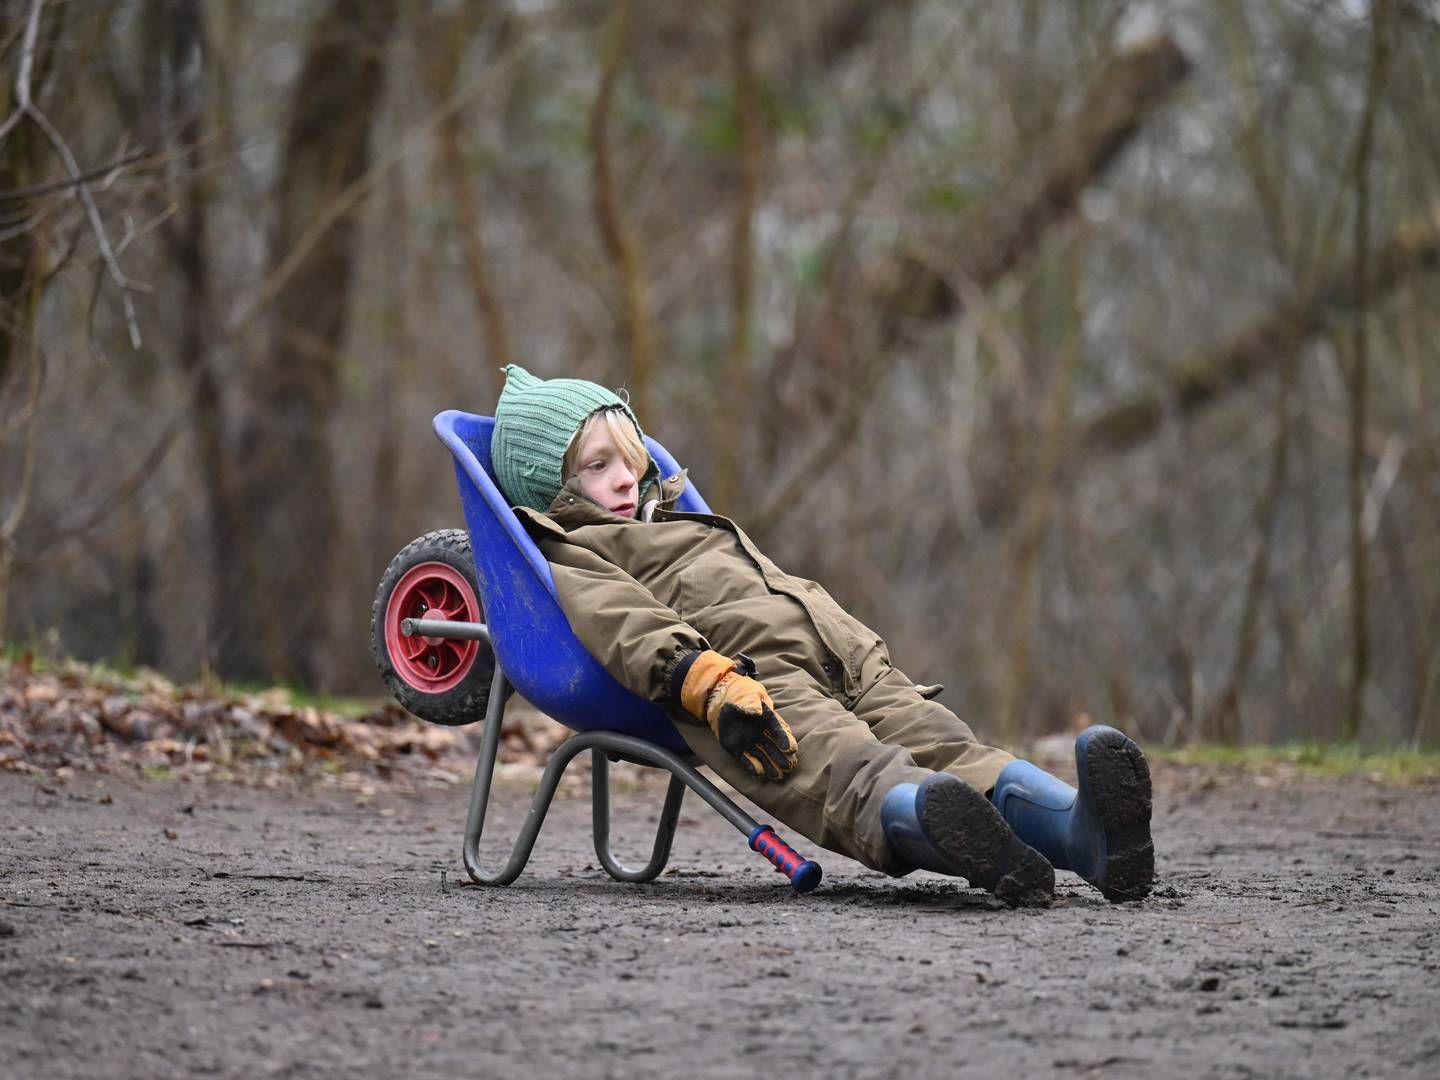 Come rain, sleet or snow - just like Nordic investors dared to put on risk in February, little kids are not afraid to spend their days playing in the woods and even napping outside midwinter across Scandinavia. | Photo: Sergei Gapon/AFP/Ritzau Scanpix